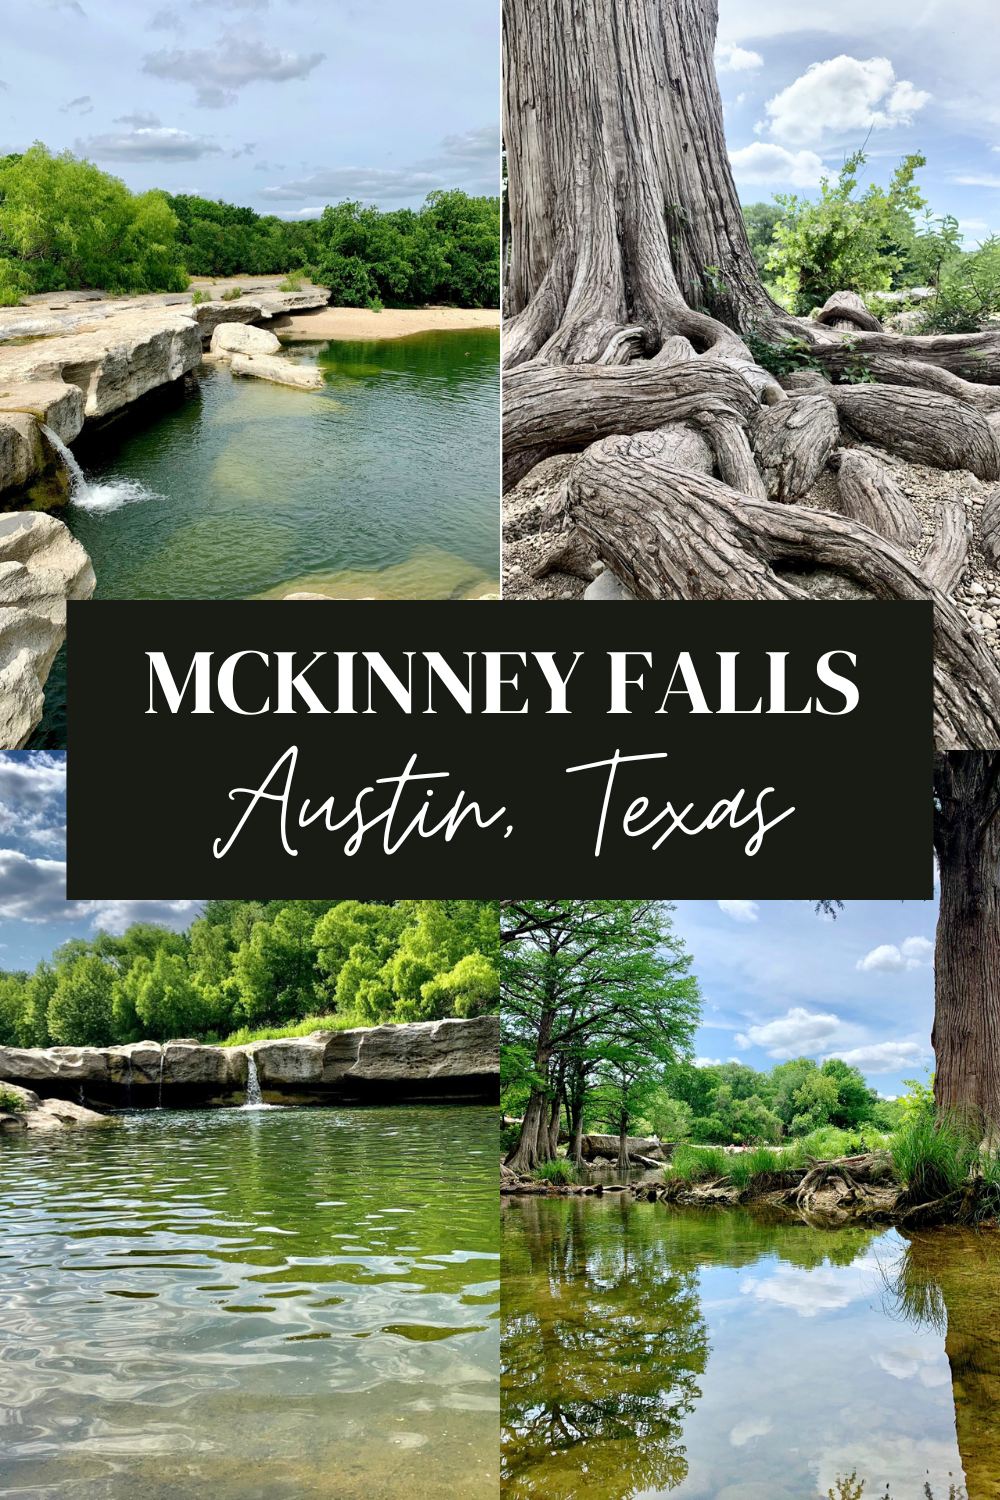 10 Pictures That Prove That McKinney Falls in Austin, Texas is One of the Prettiest Swimming Holes Ever | Finding Mandee